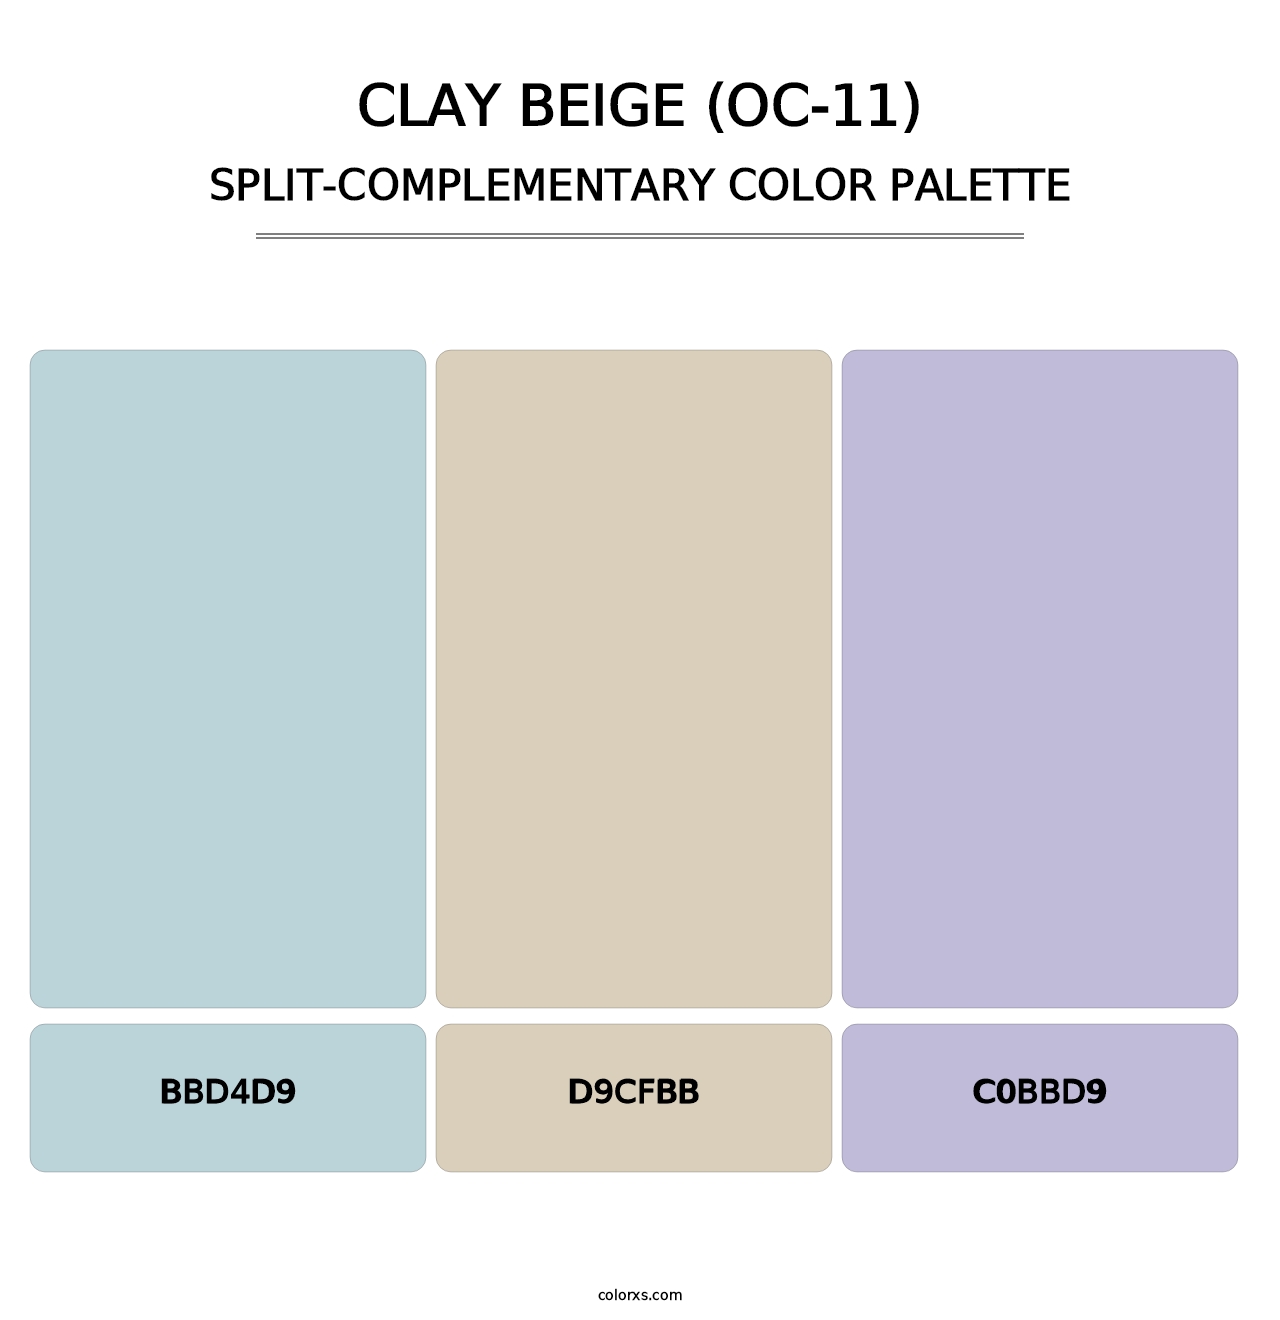 Clay Beige (OC-11) - Split-Complementary Color Palette